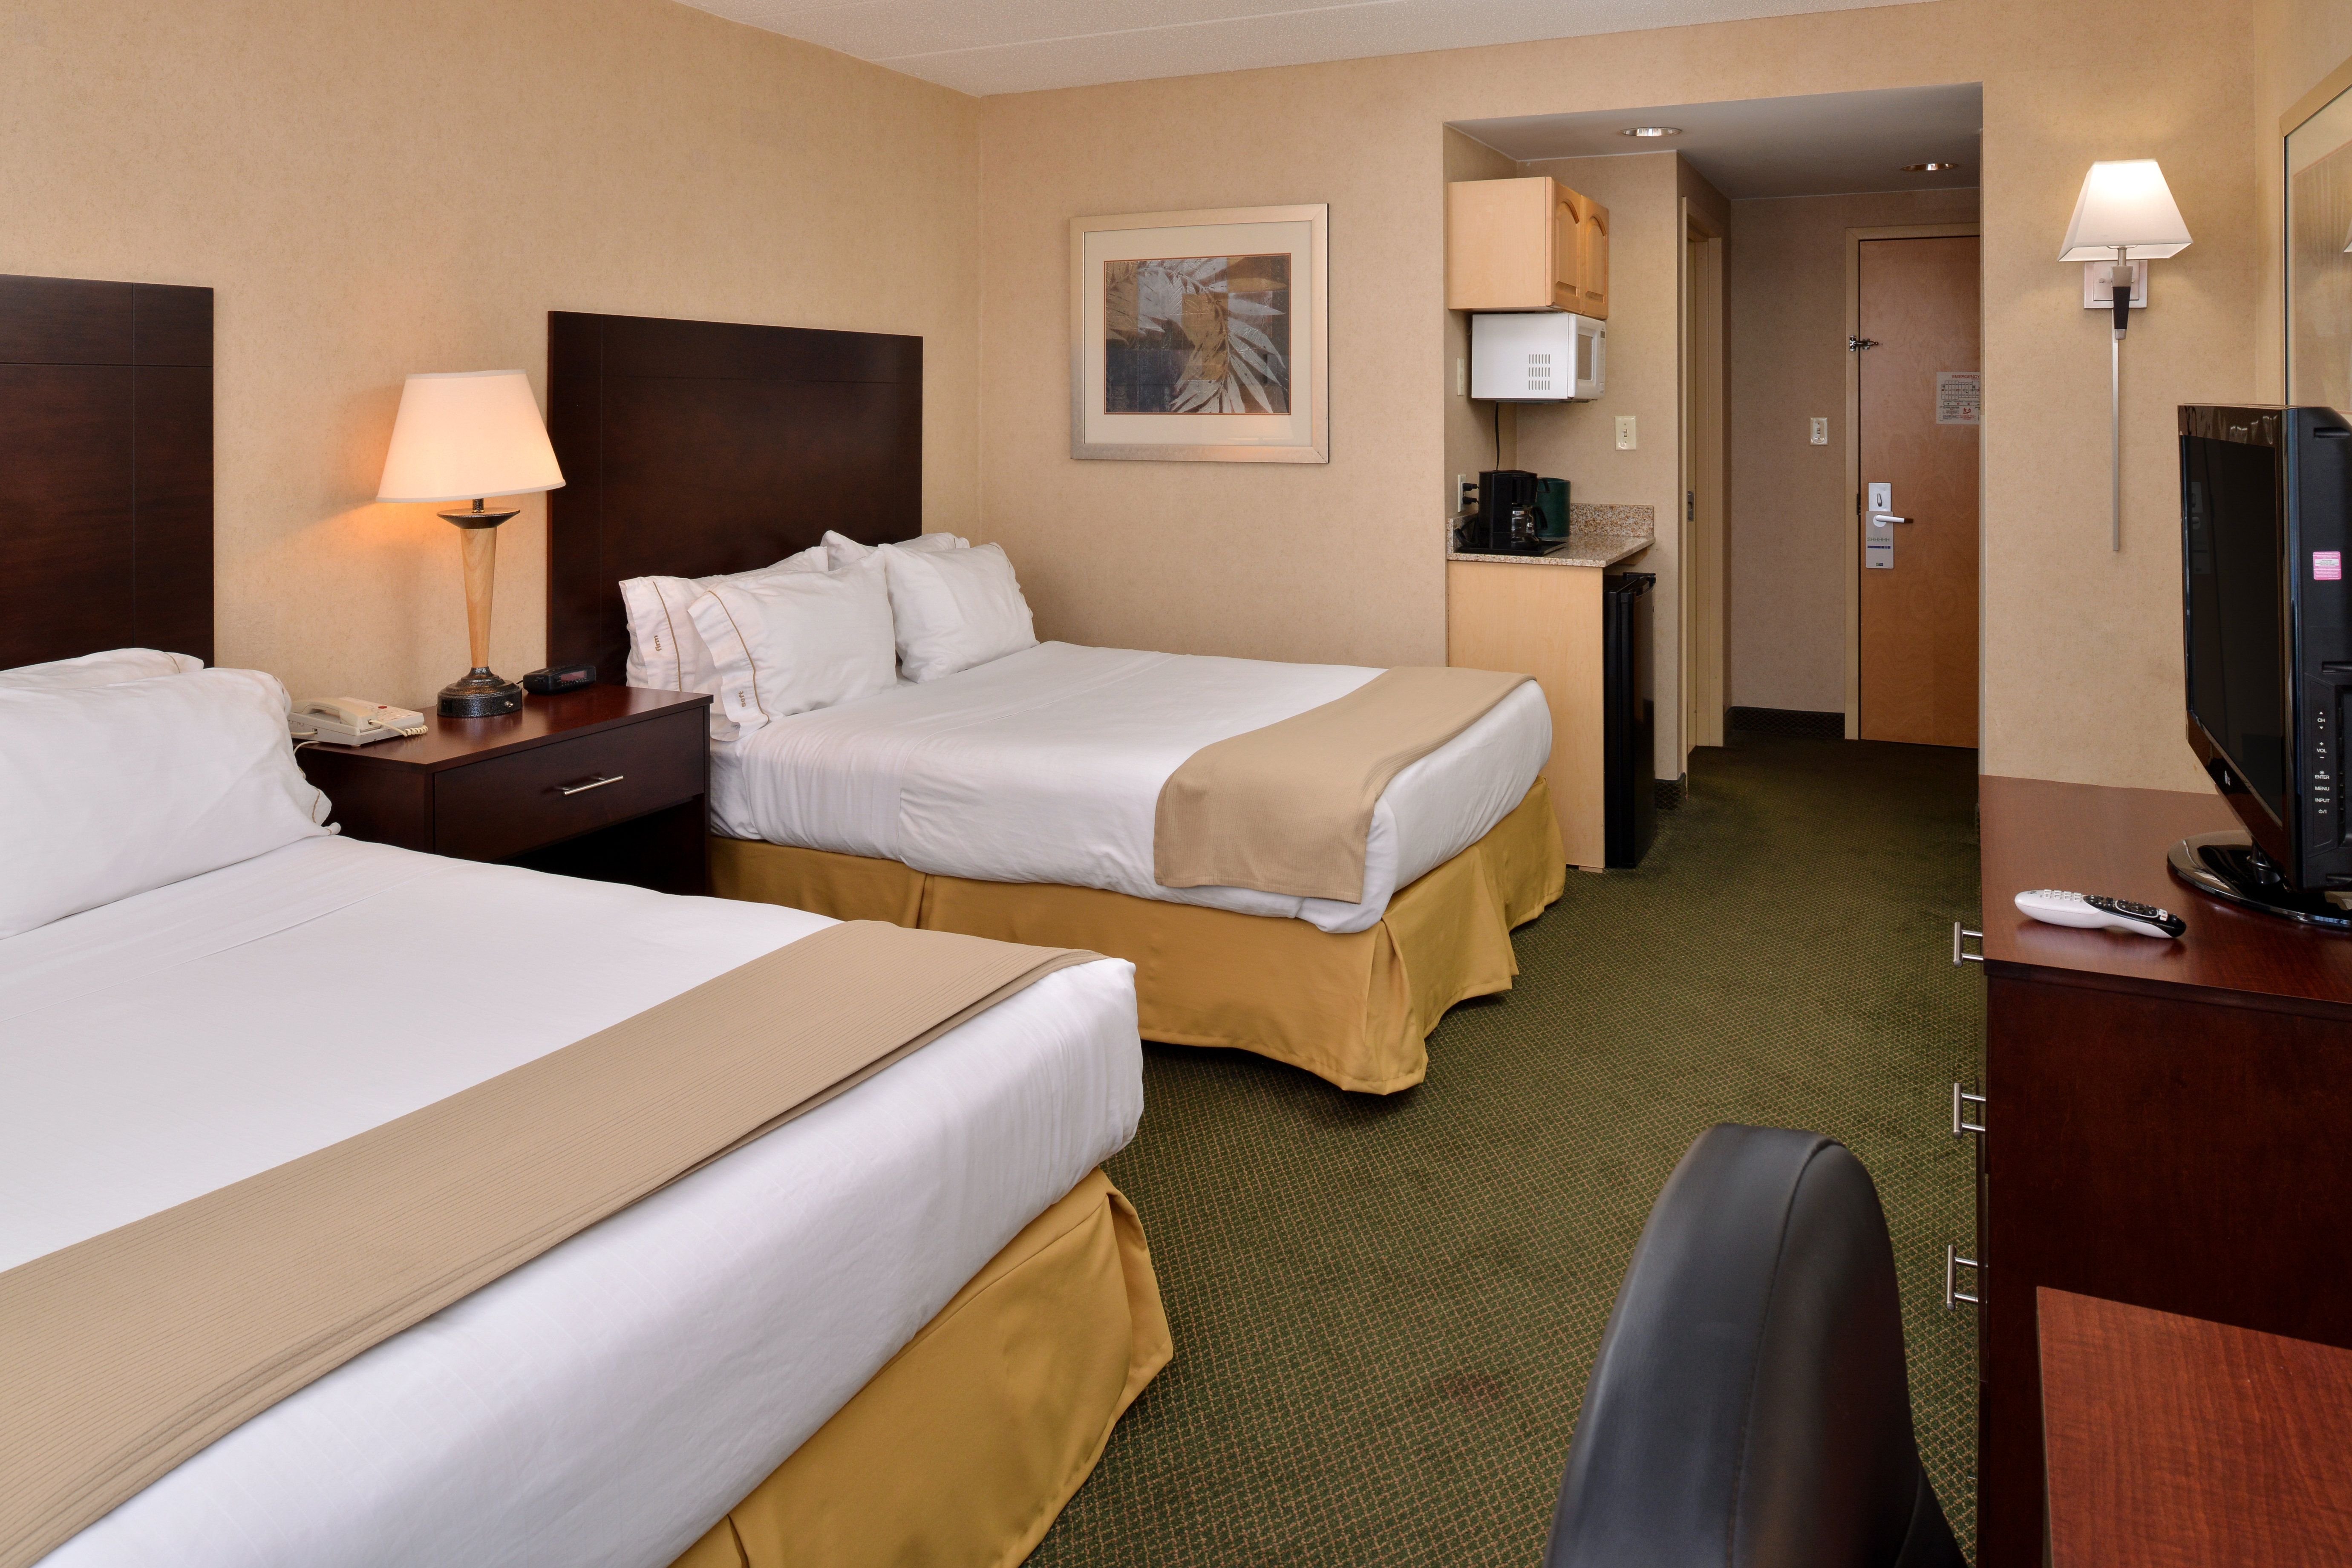 Relax in our newly appointed guest rooms with two queen beds